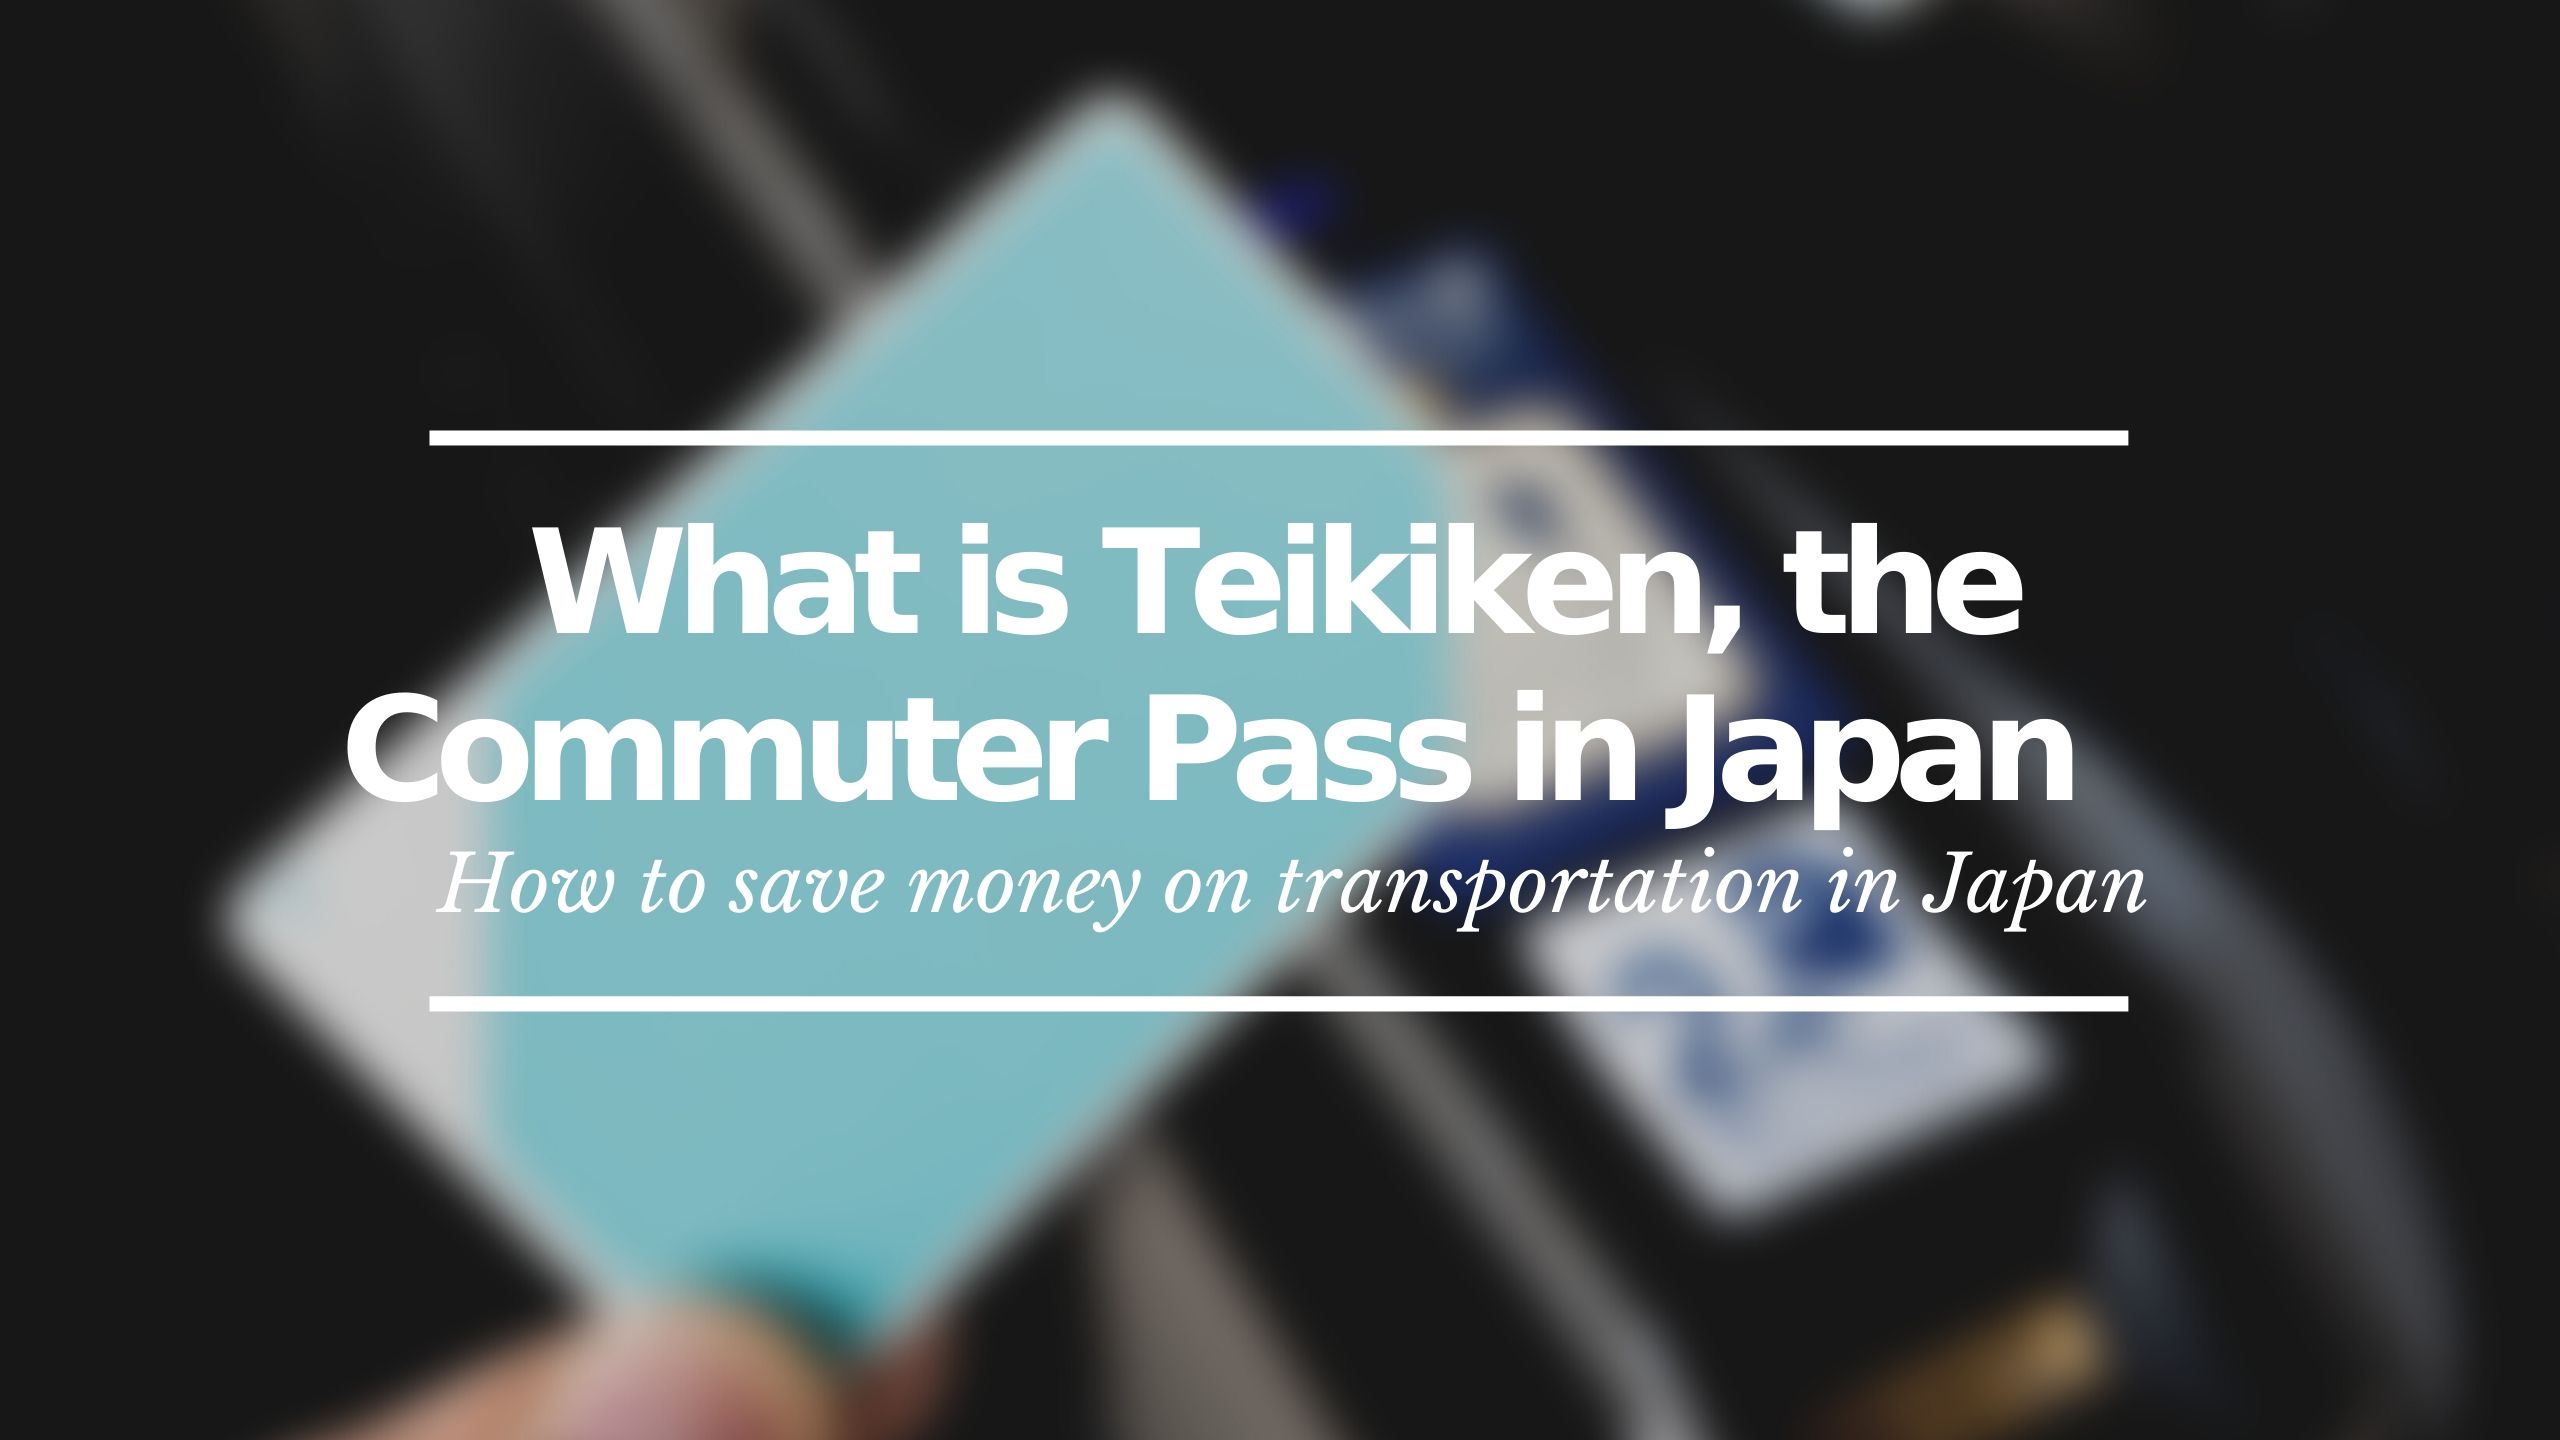 What is Teikiken: the Commuter Pass in Japan